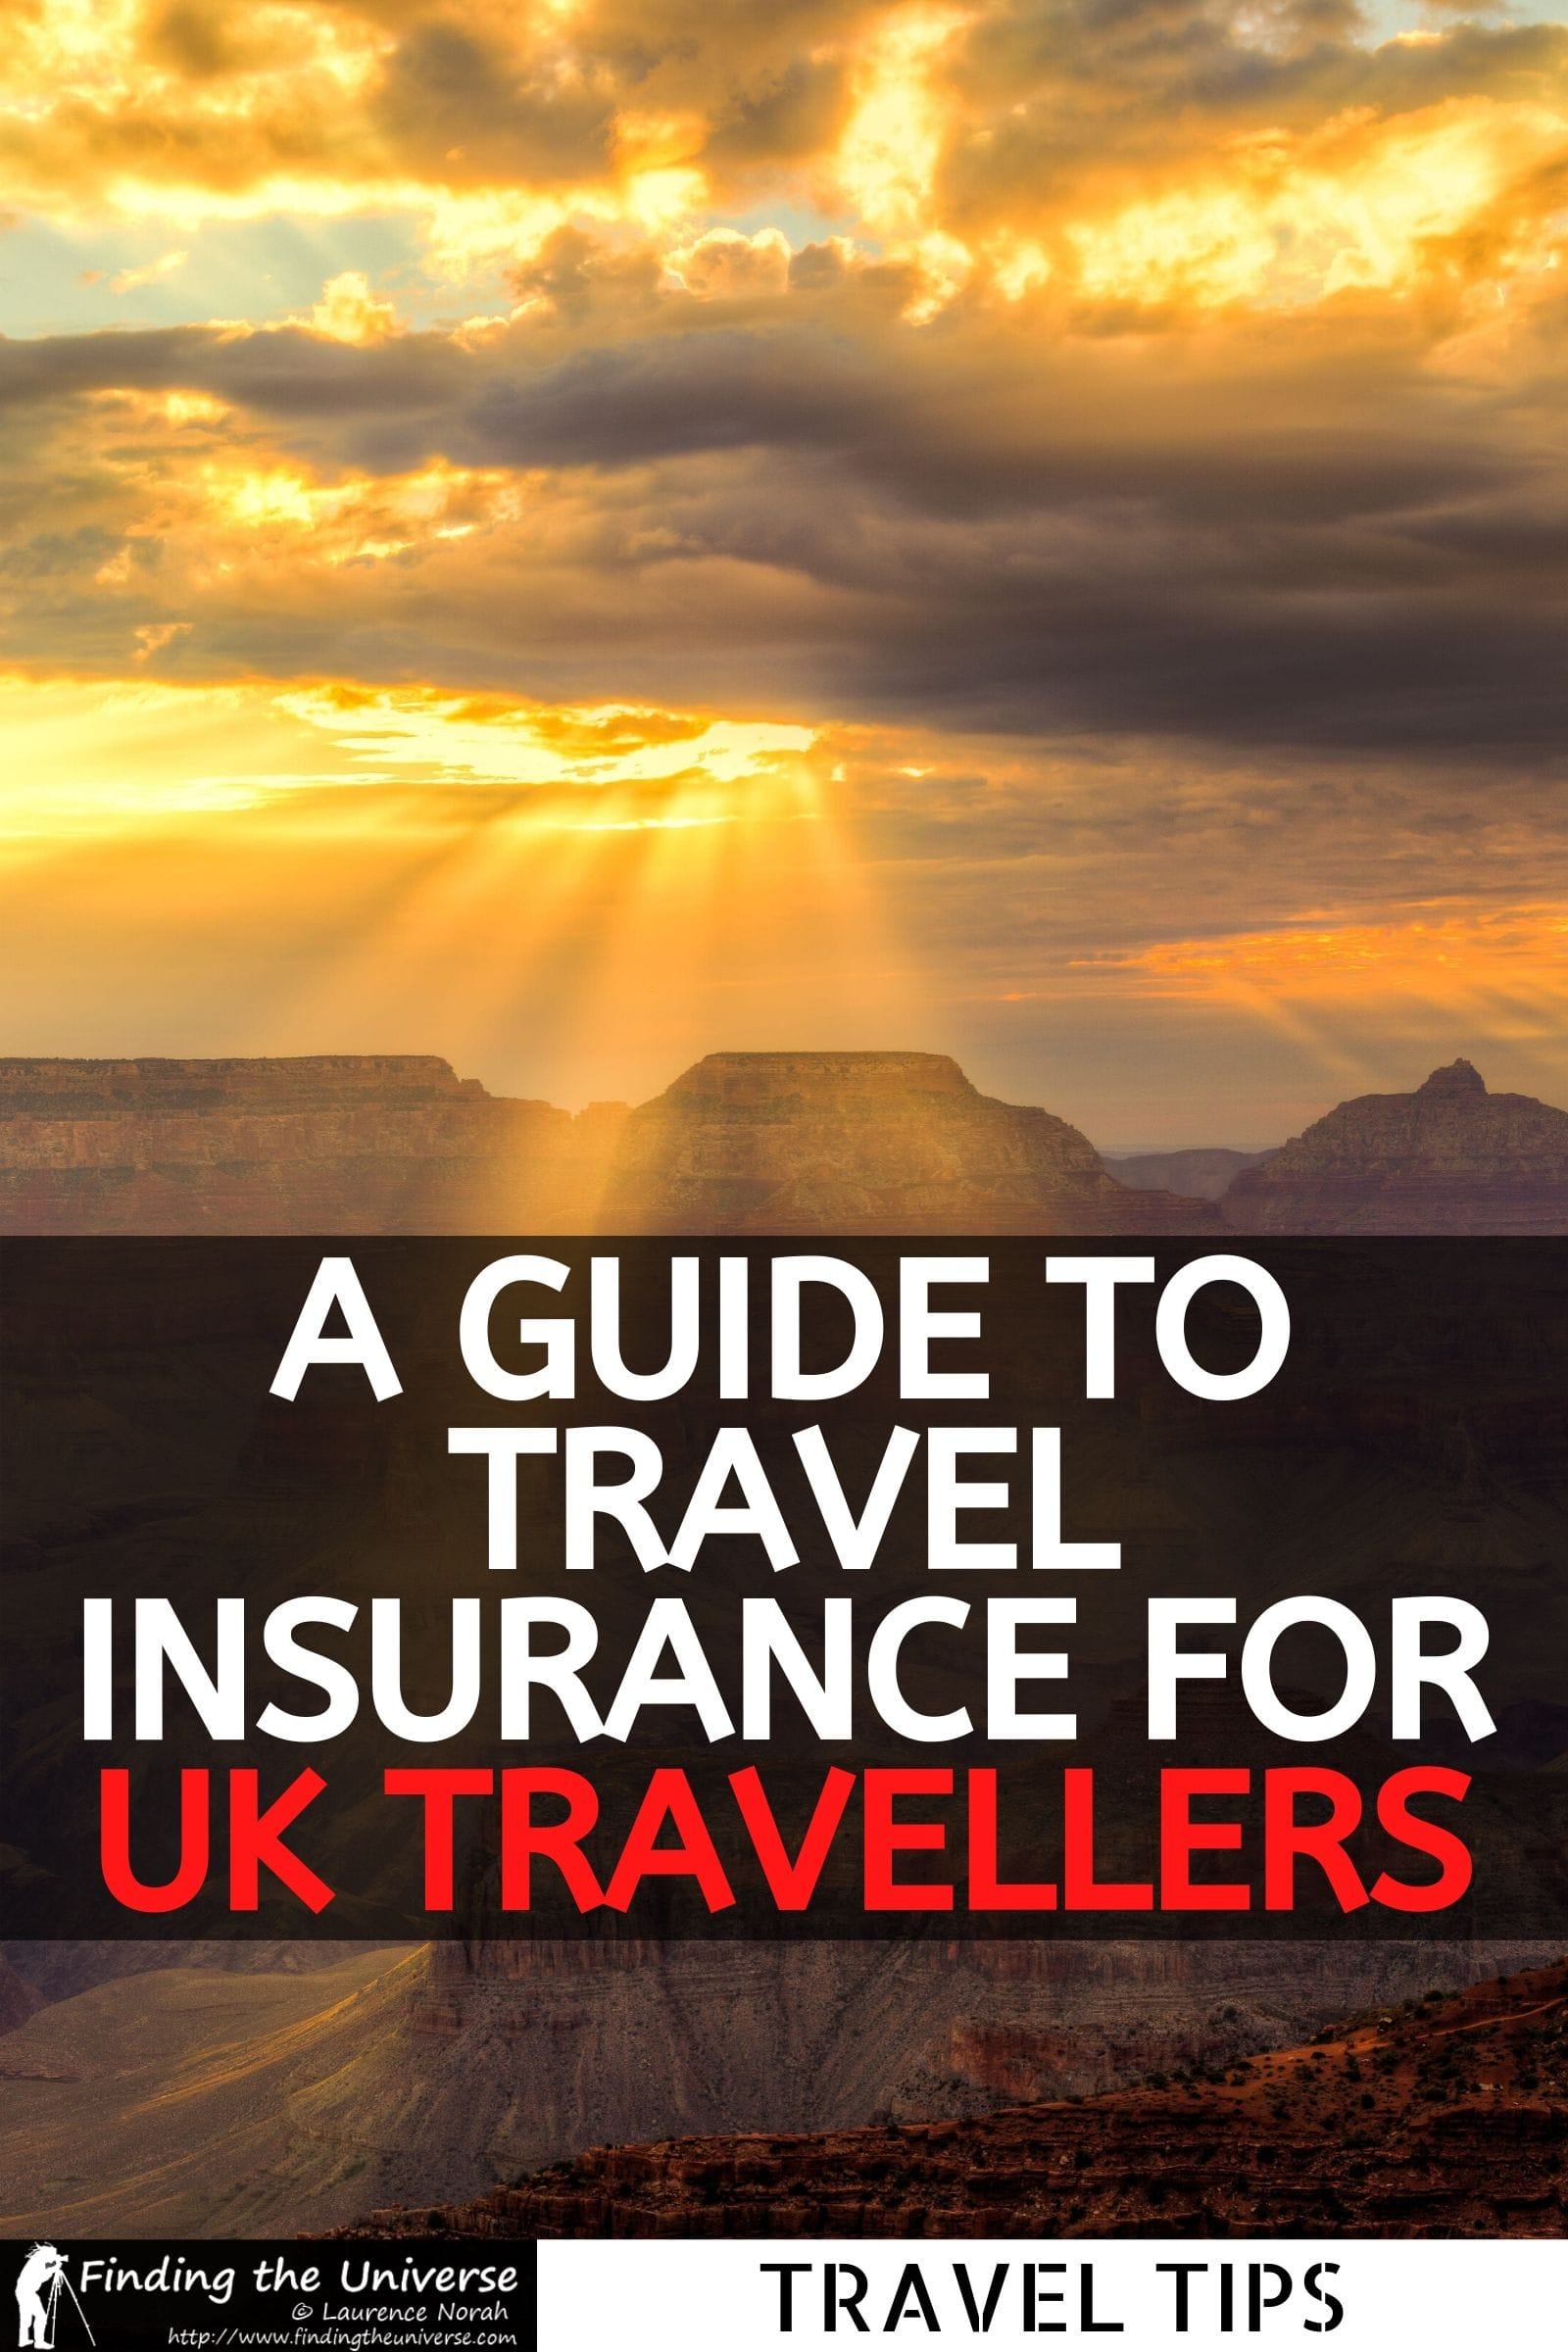 A detailed guide to travel insurance for UK travellers. What to look for in a policy, common inclusions and exclusions, & a round up of the options